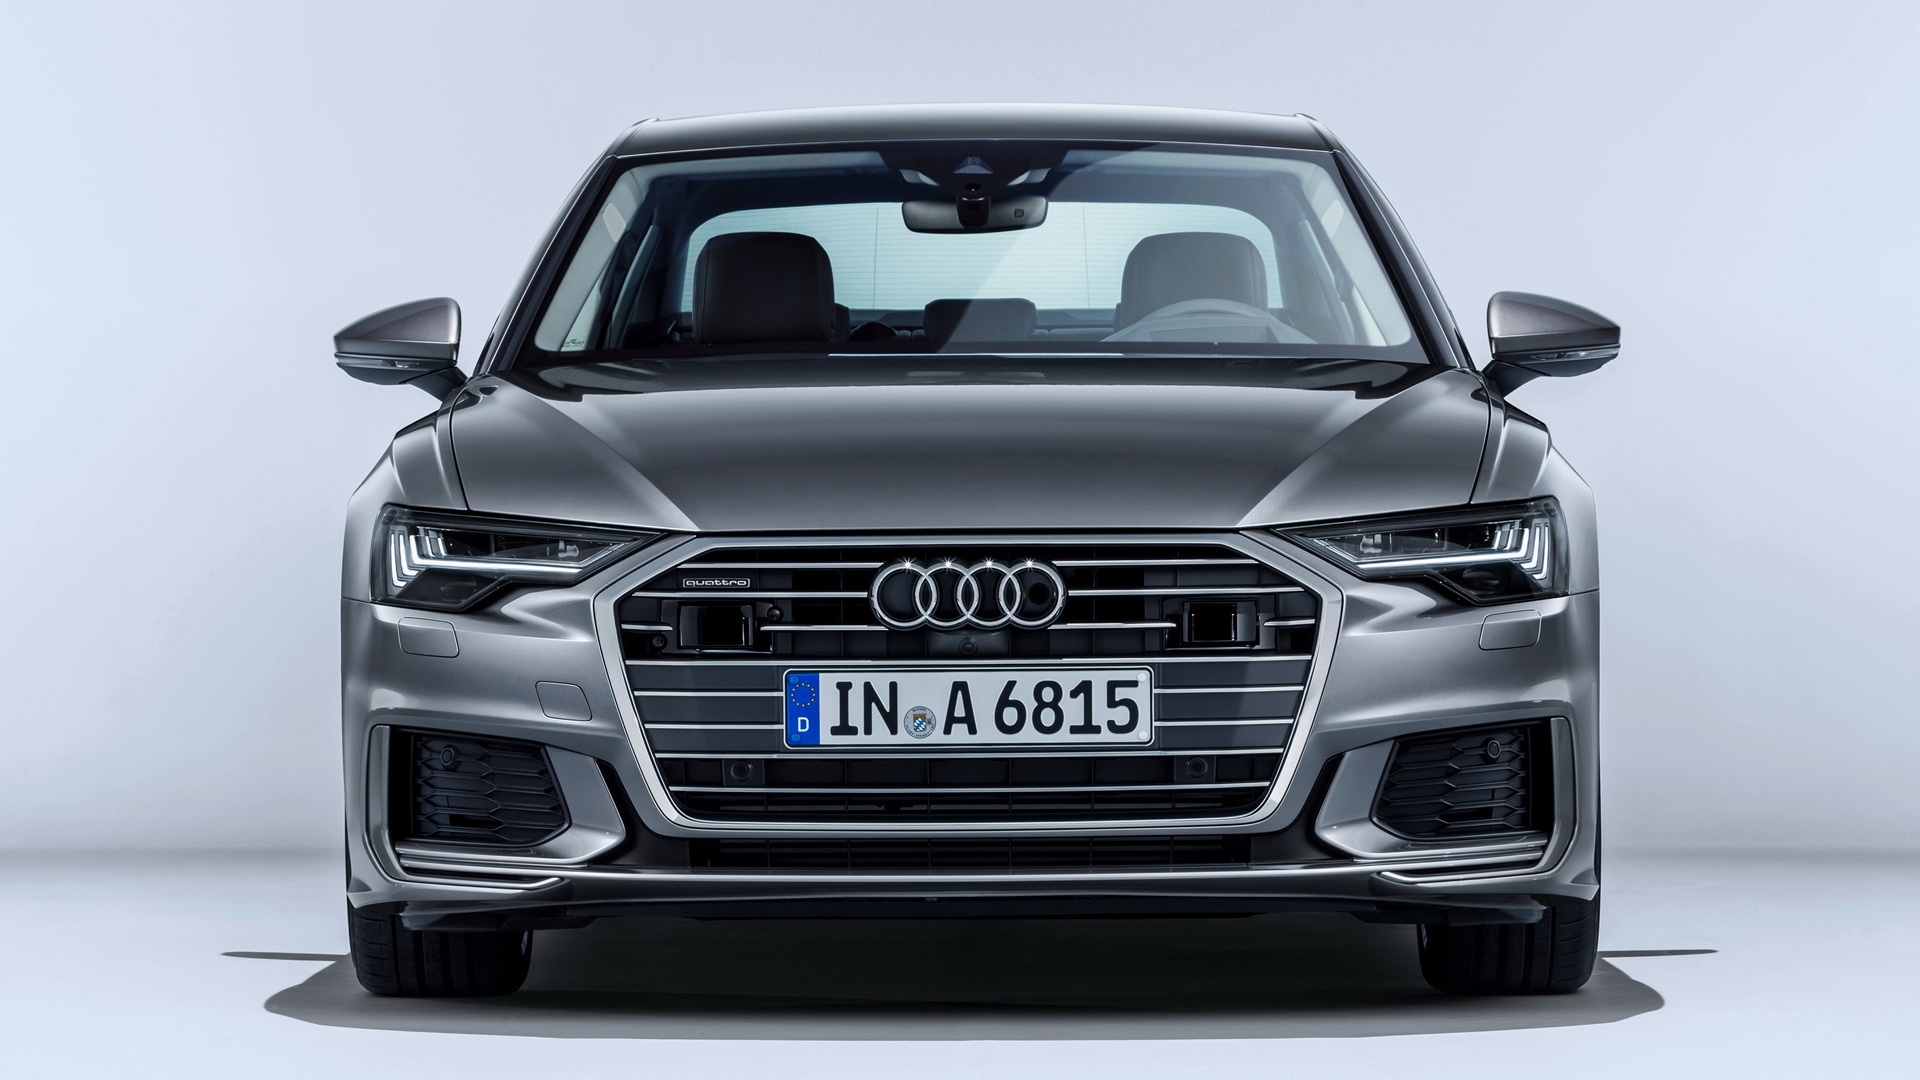 Audi A6 S Line HD Wallpaper Background Image